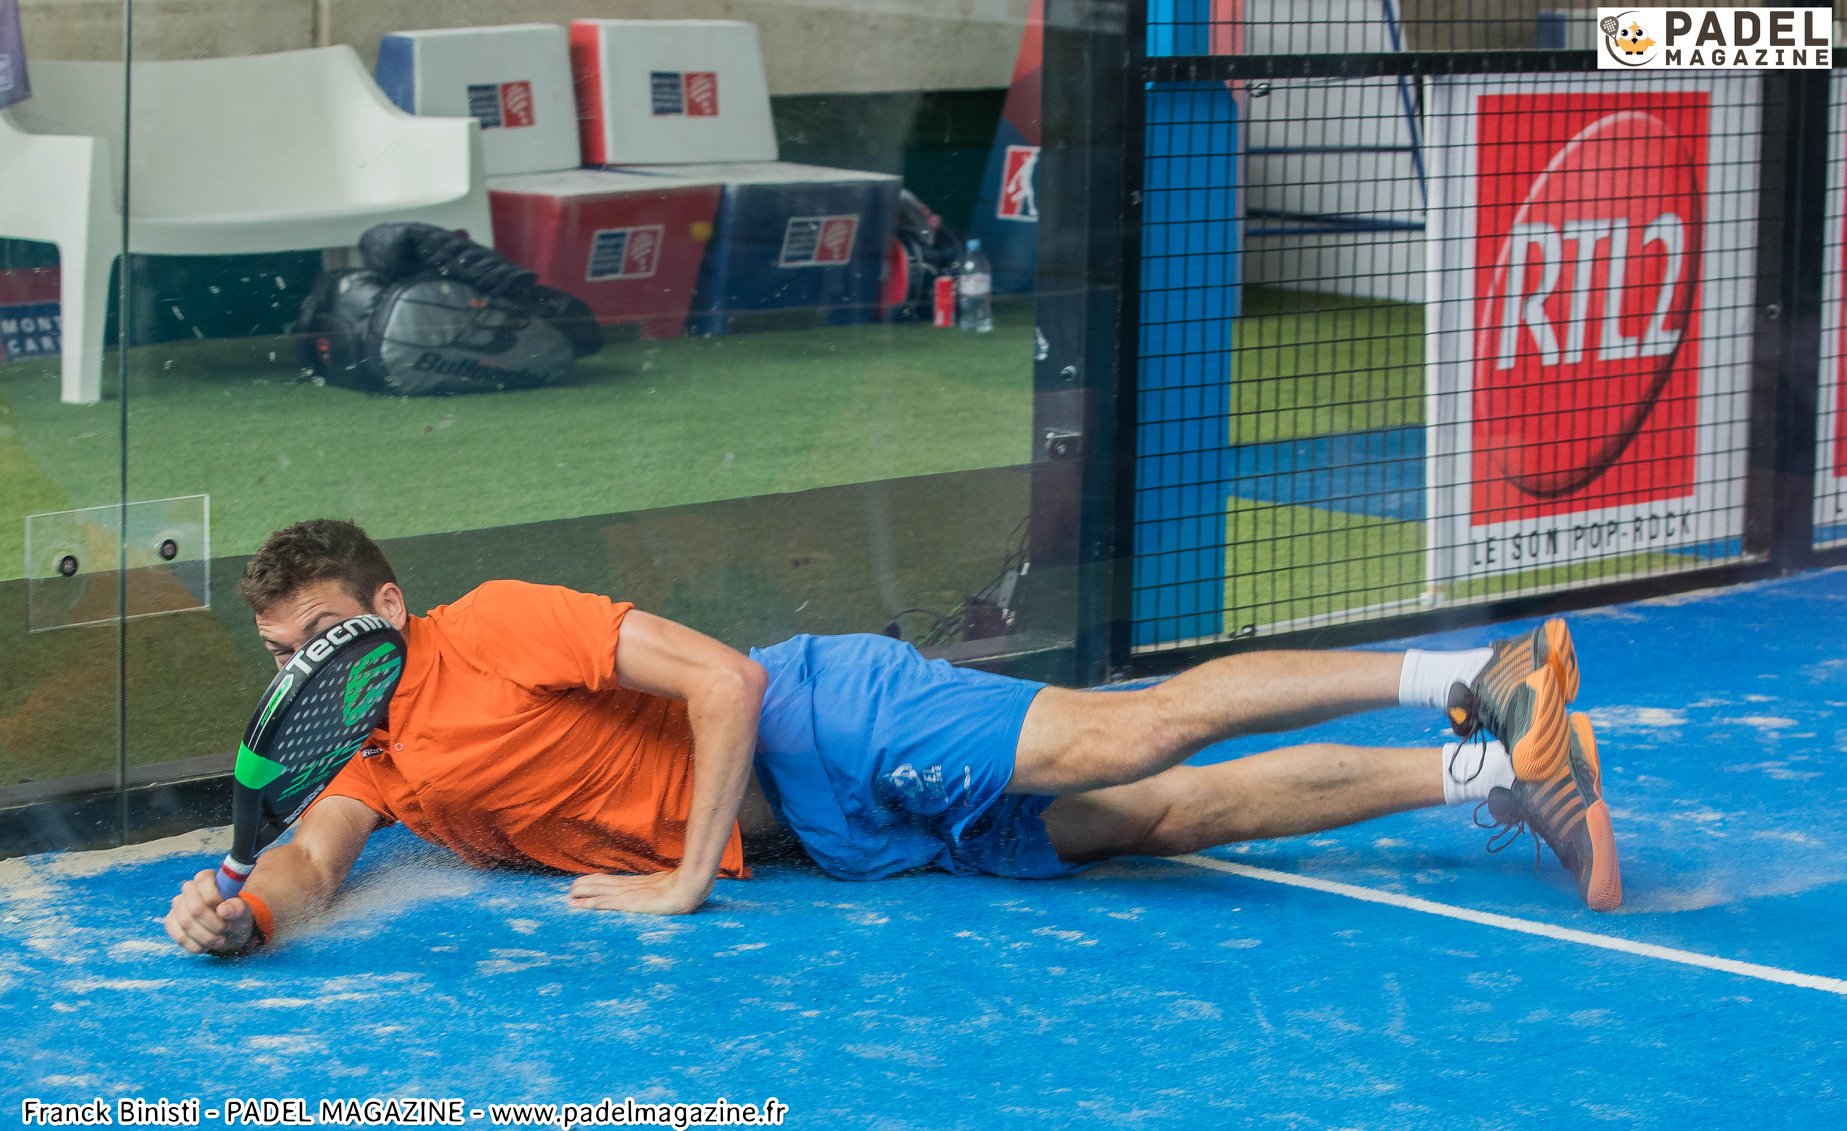 Jérémy Scatena is injured in Word Padel Tour